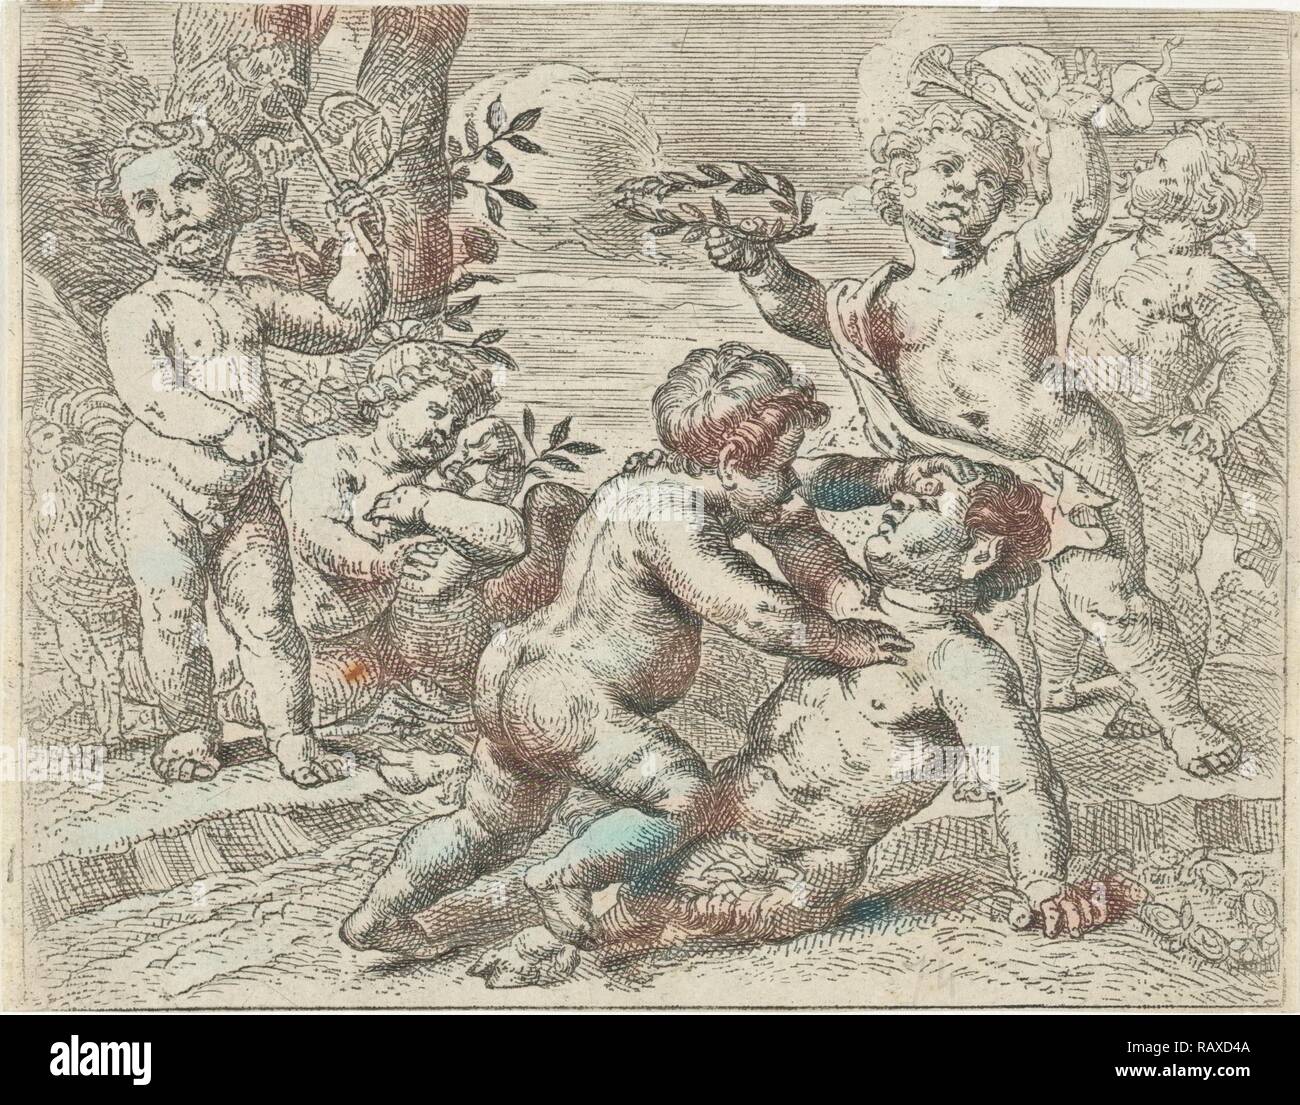 Fighting putti, Peter van Lint, 1619 - 1690. Reimagined by Gibon. Classic art with a modern twist reimagined Stock Photo